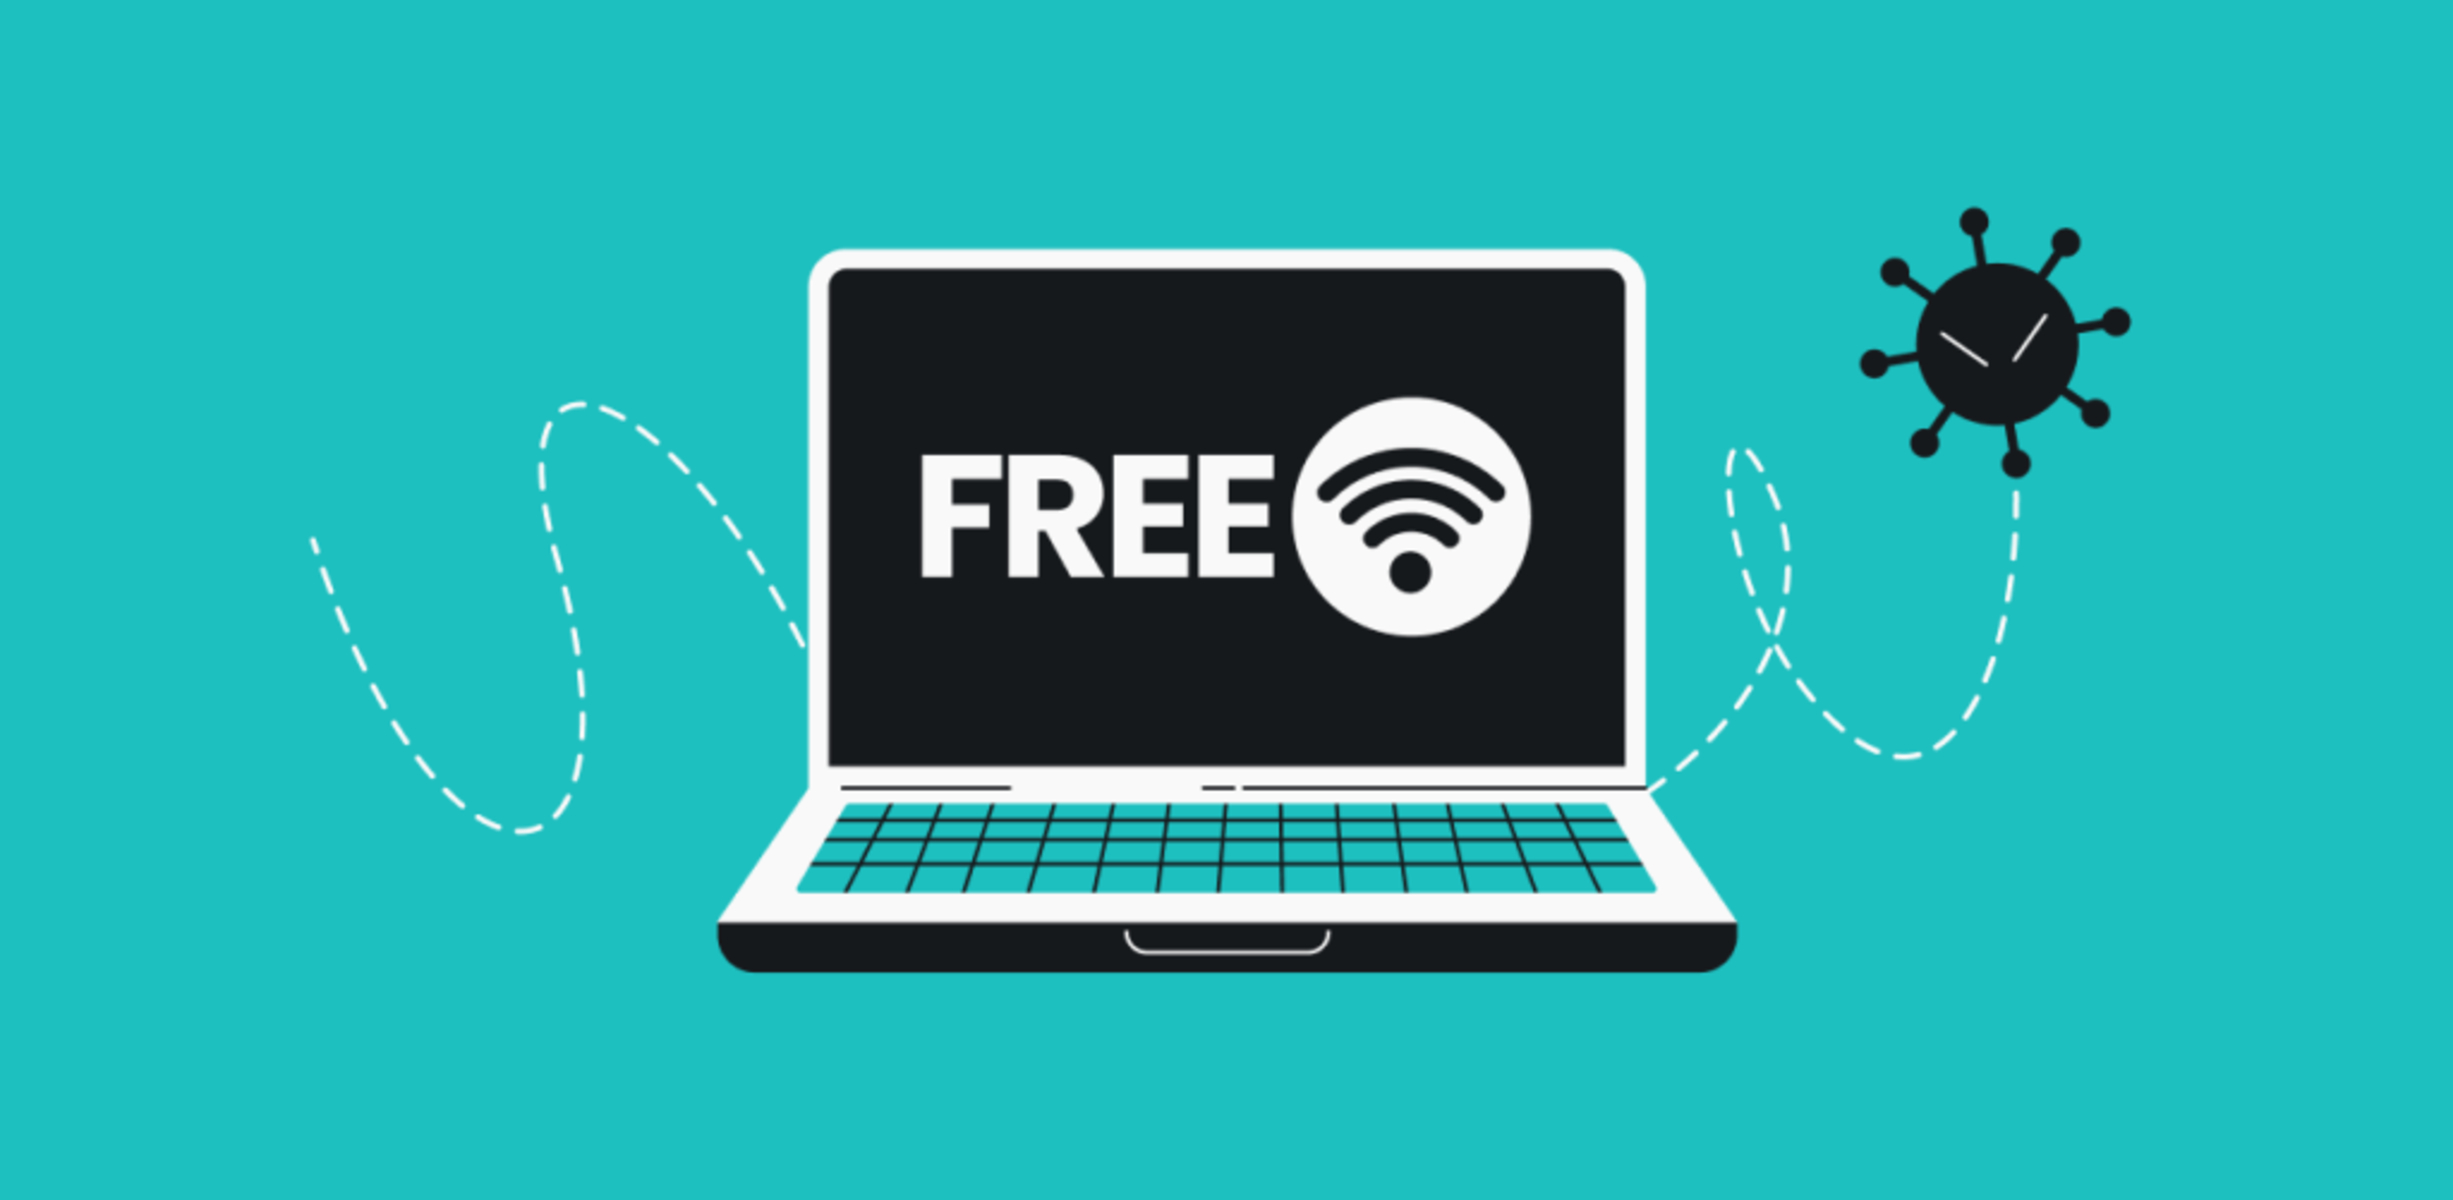 Creating A Free Wi-Fi Hotspot: Easy And Secure Methods